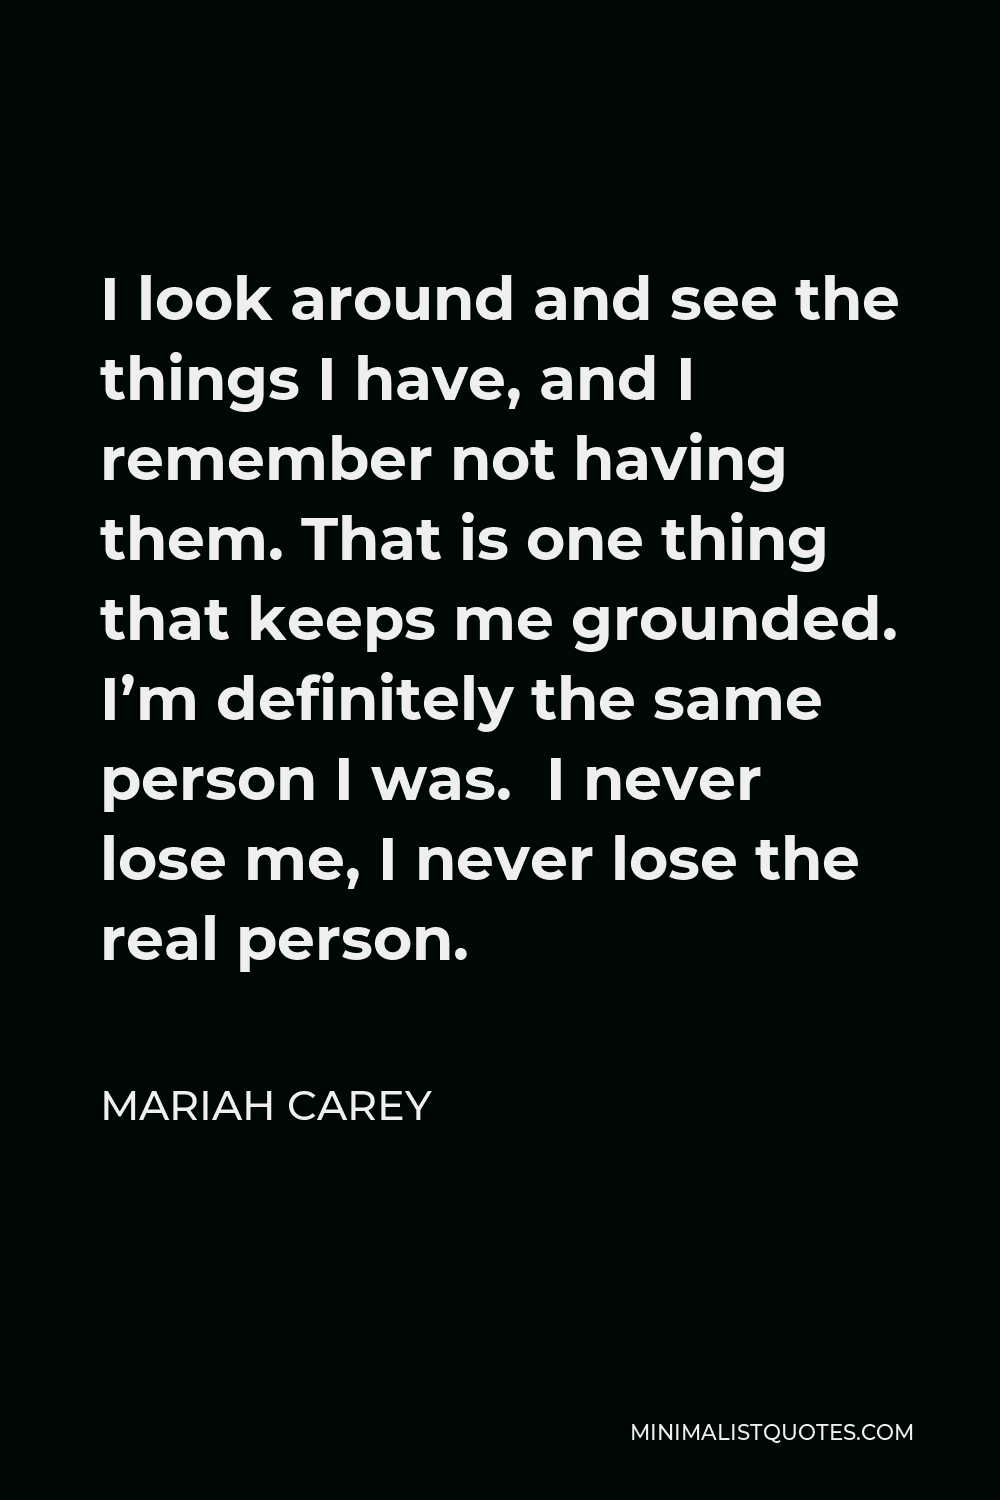 Mariah Carey Quote - I look around and see the things I have, and I remember not having them. That is one thing that keeps me grounded. I’m definitely the same person I was. I never lose me, I never lose the real person.